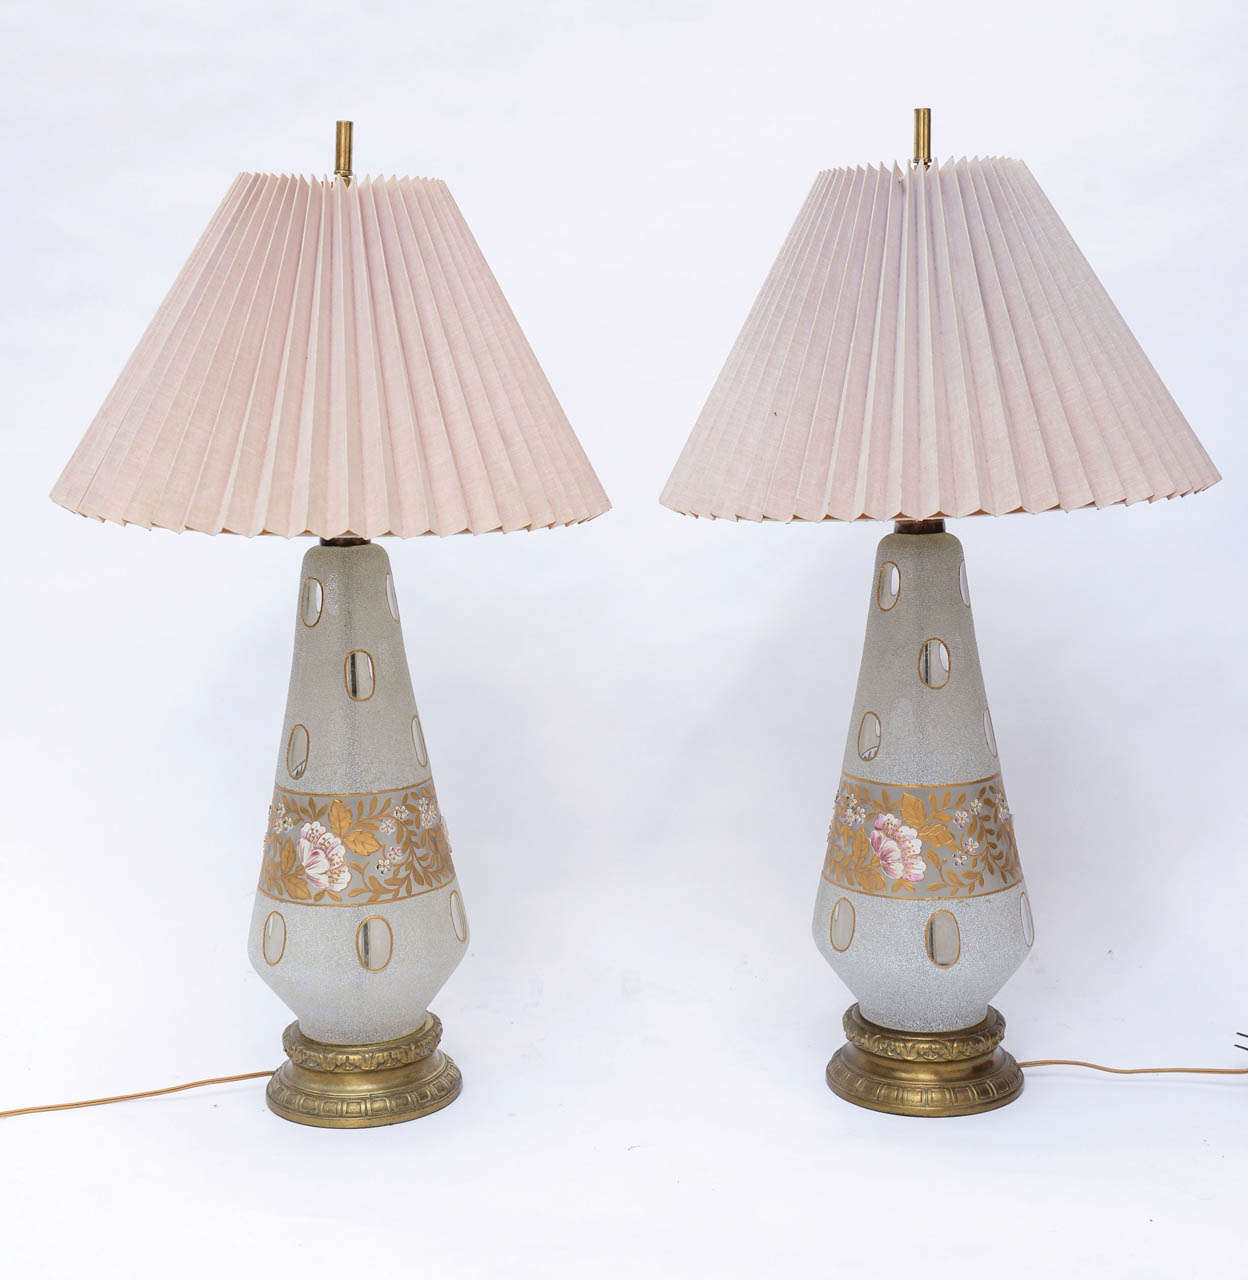 Beautiful Tall Table lamps that are hand painted Frosted glass.
Sweeten a room with these demure and feminine pieces.  Stunning frosted coin dot glass lamps circa 1950's, probably made by Fenton, (thought unmarked as never been on these periods).